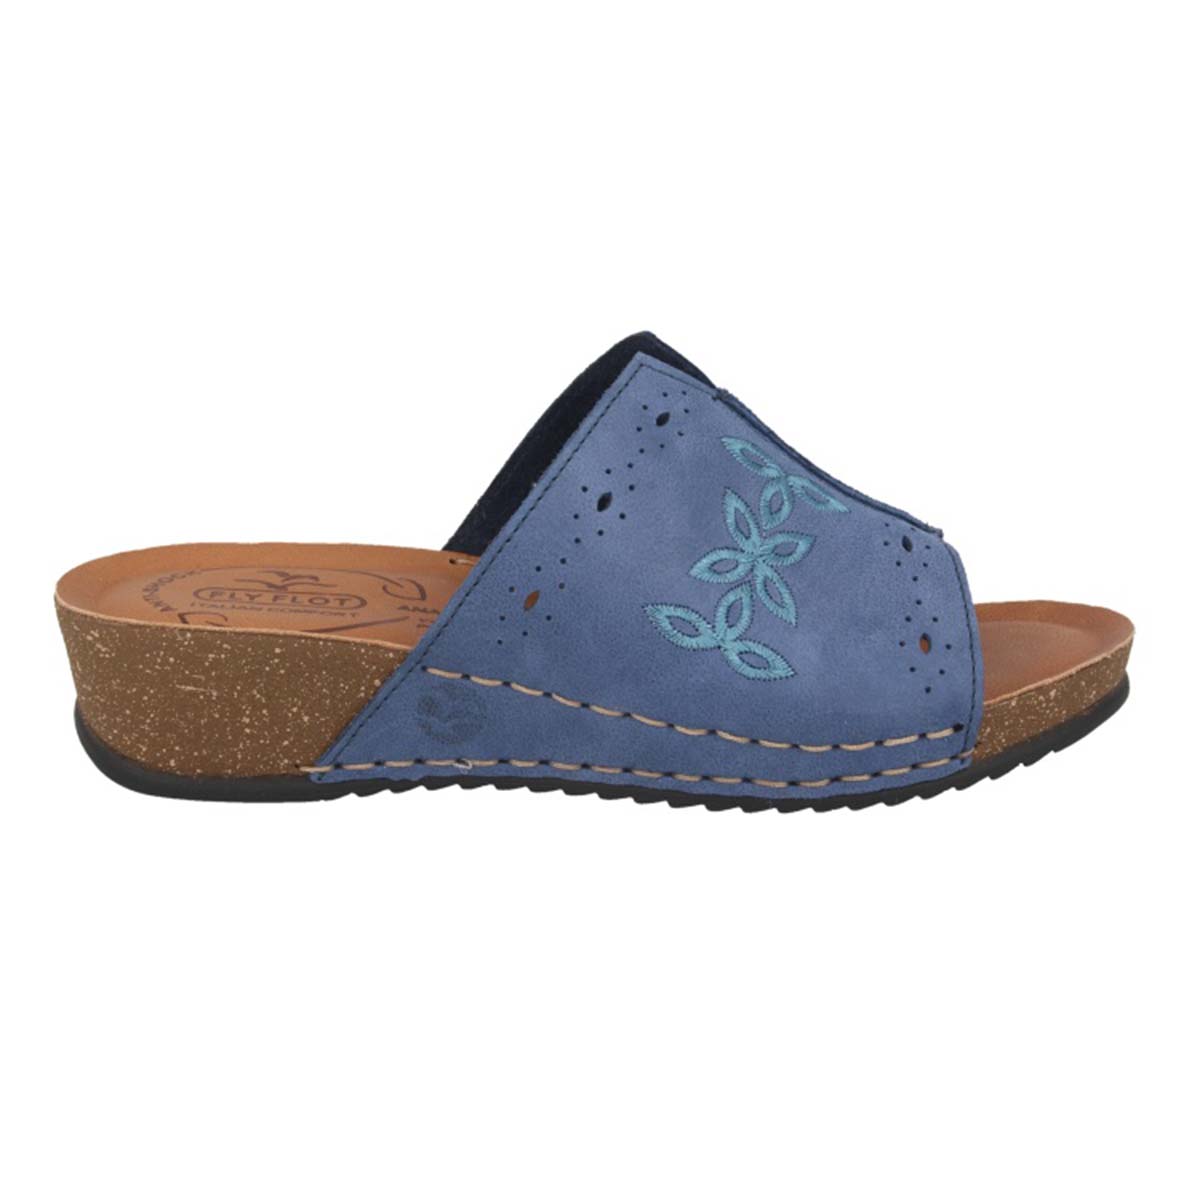 See the Leather Wedge With Anti-Shock Cushioned Leather Insole in the colour BLUE, available in various sizes